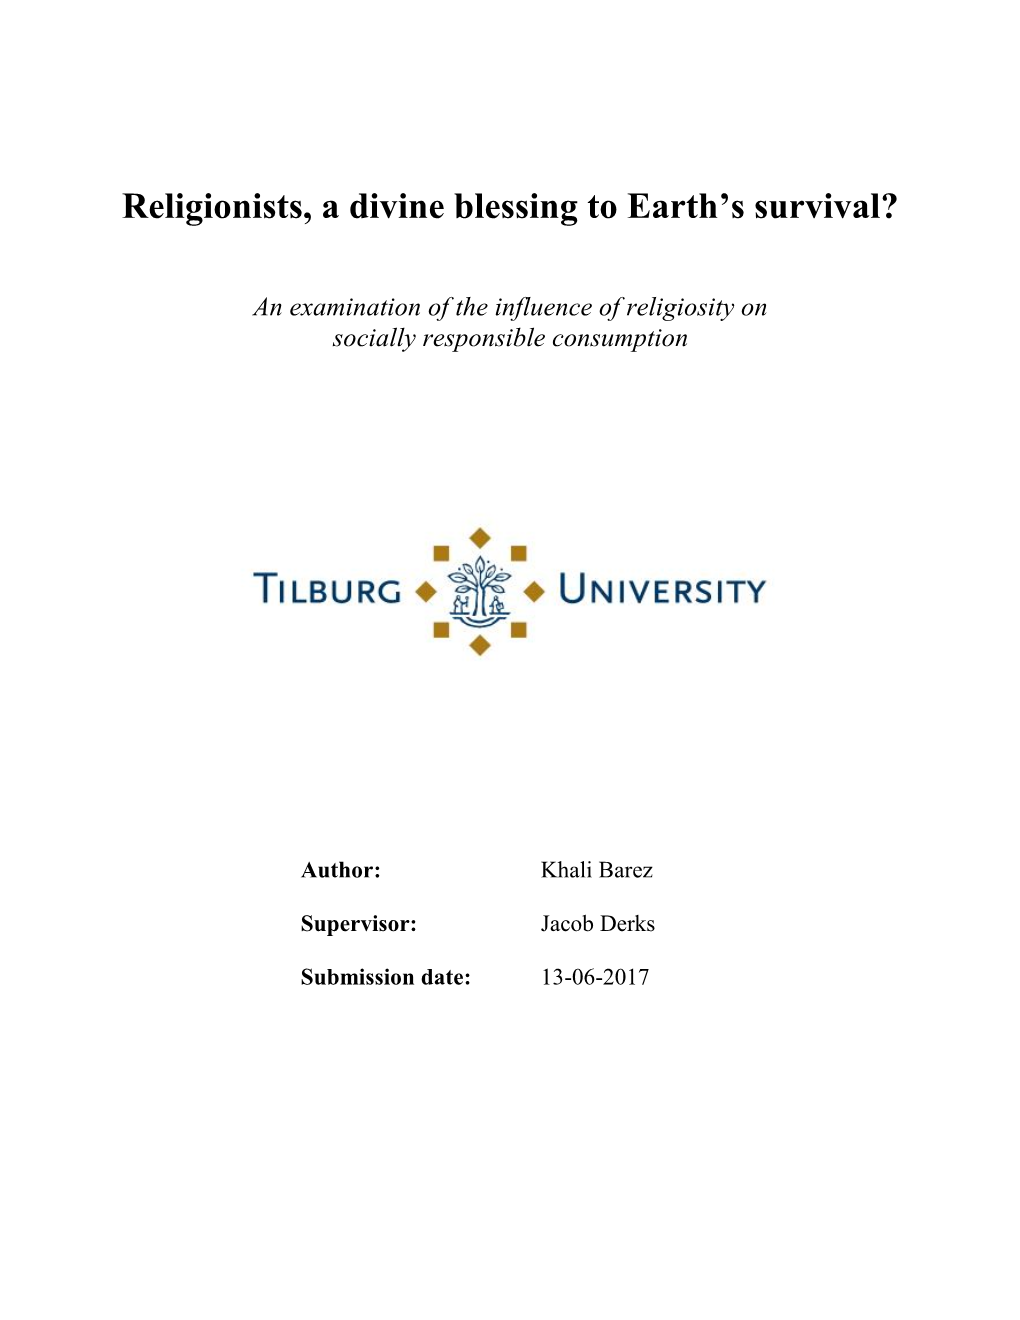 Religionists, a Divine Blessing to Earth's Survival?